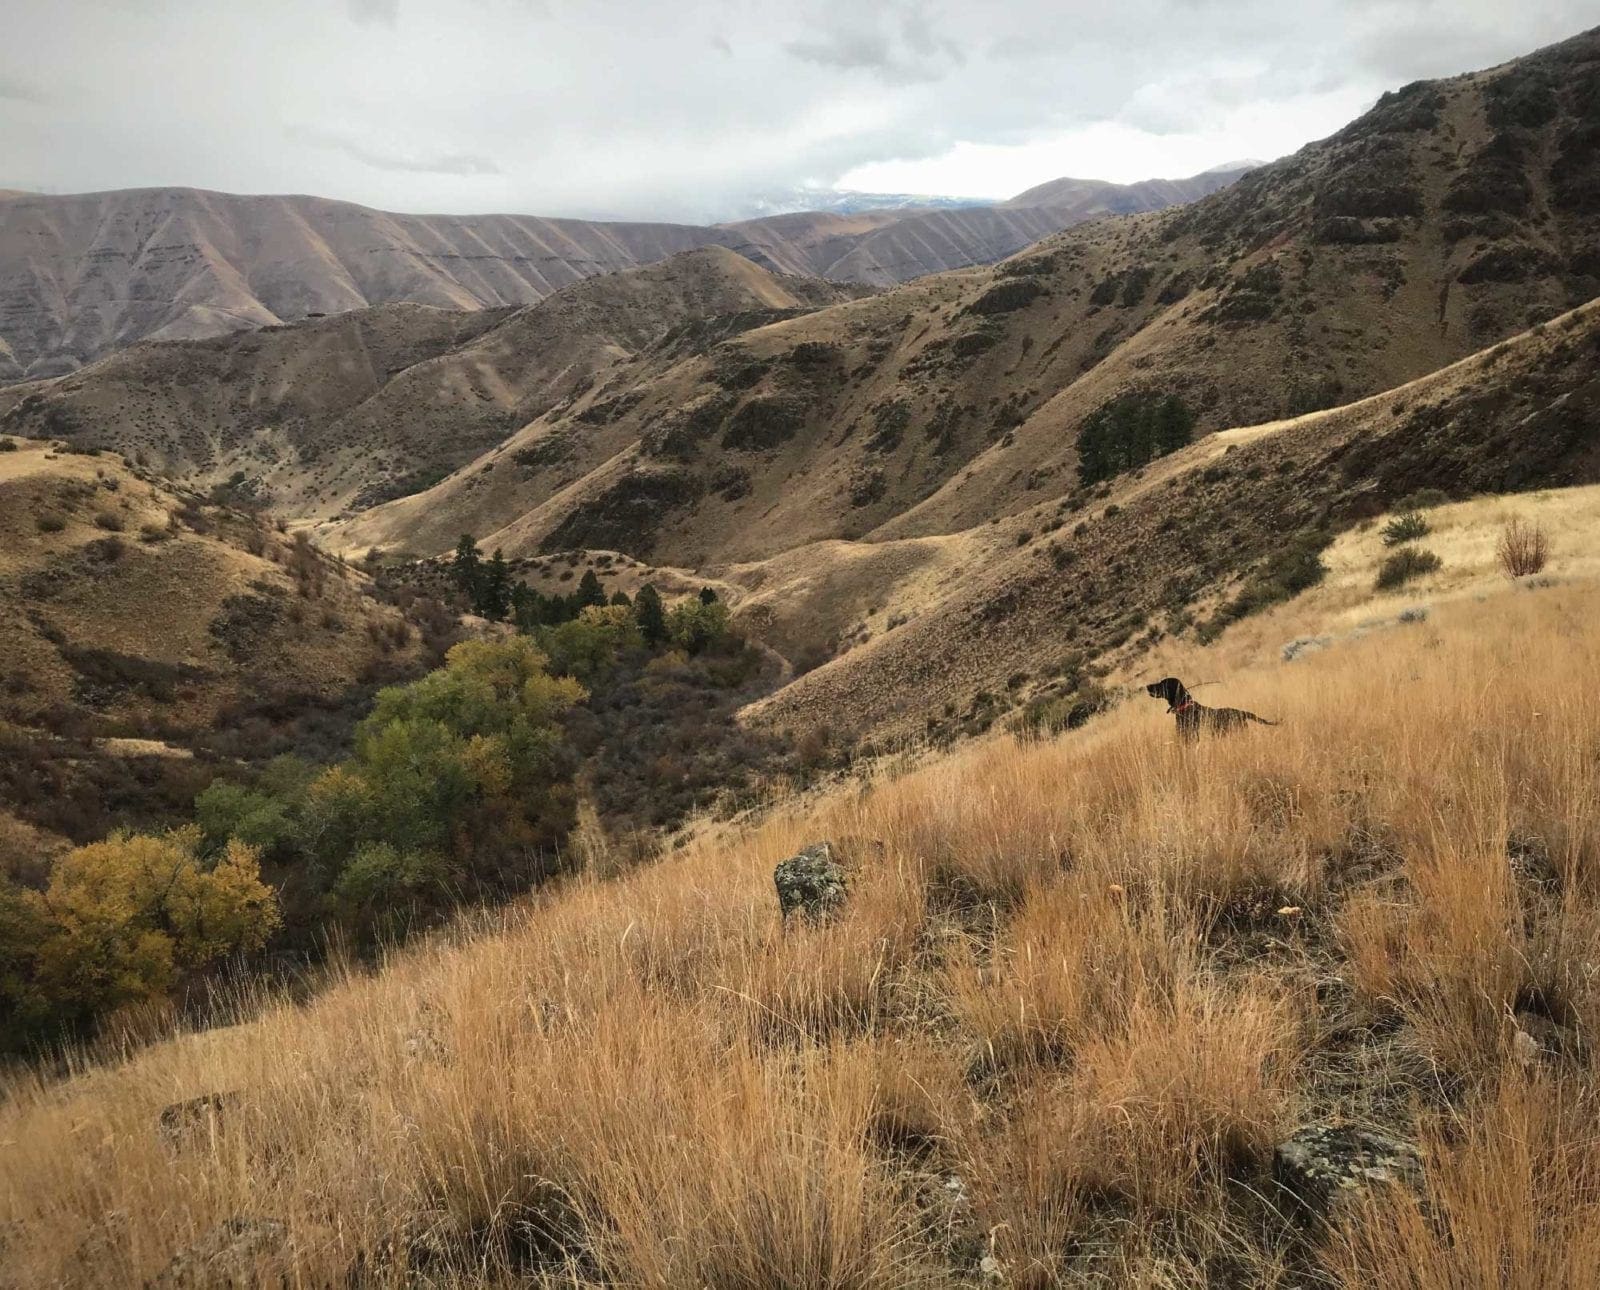 A hunting dog looks over the edge of Hells Canyon